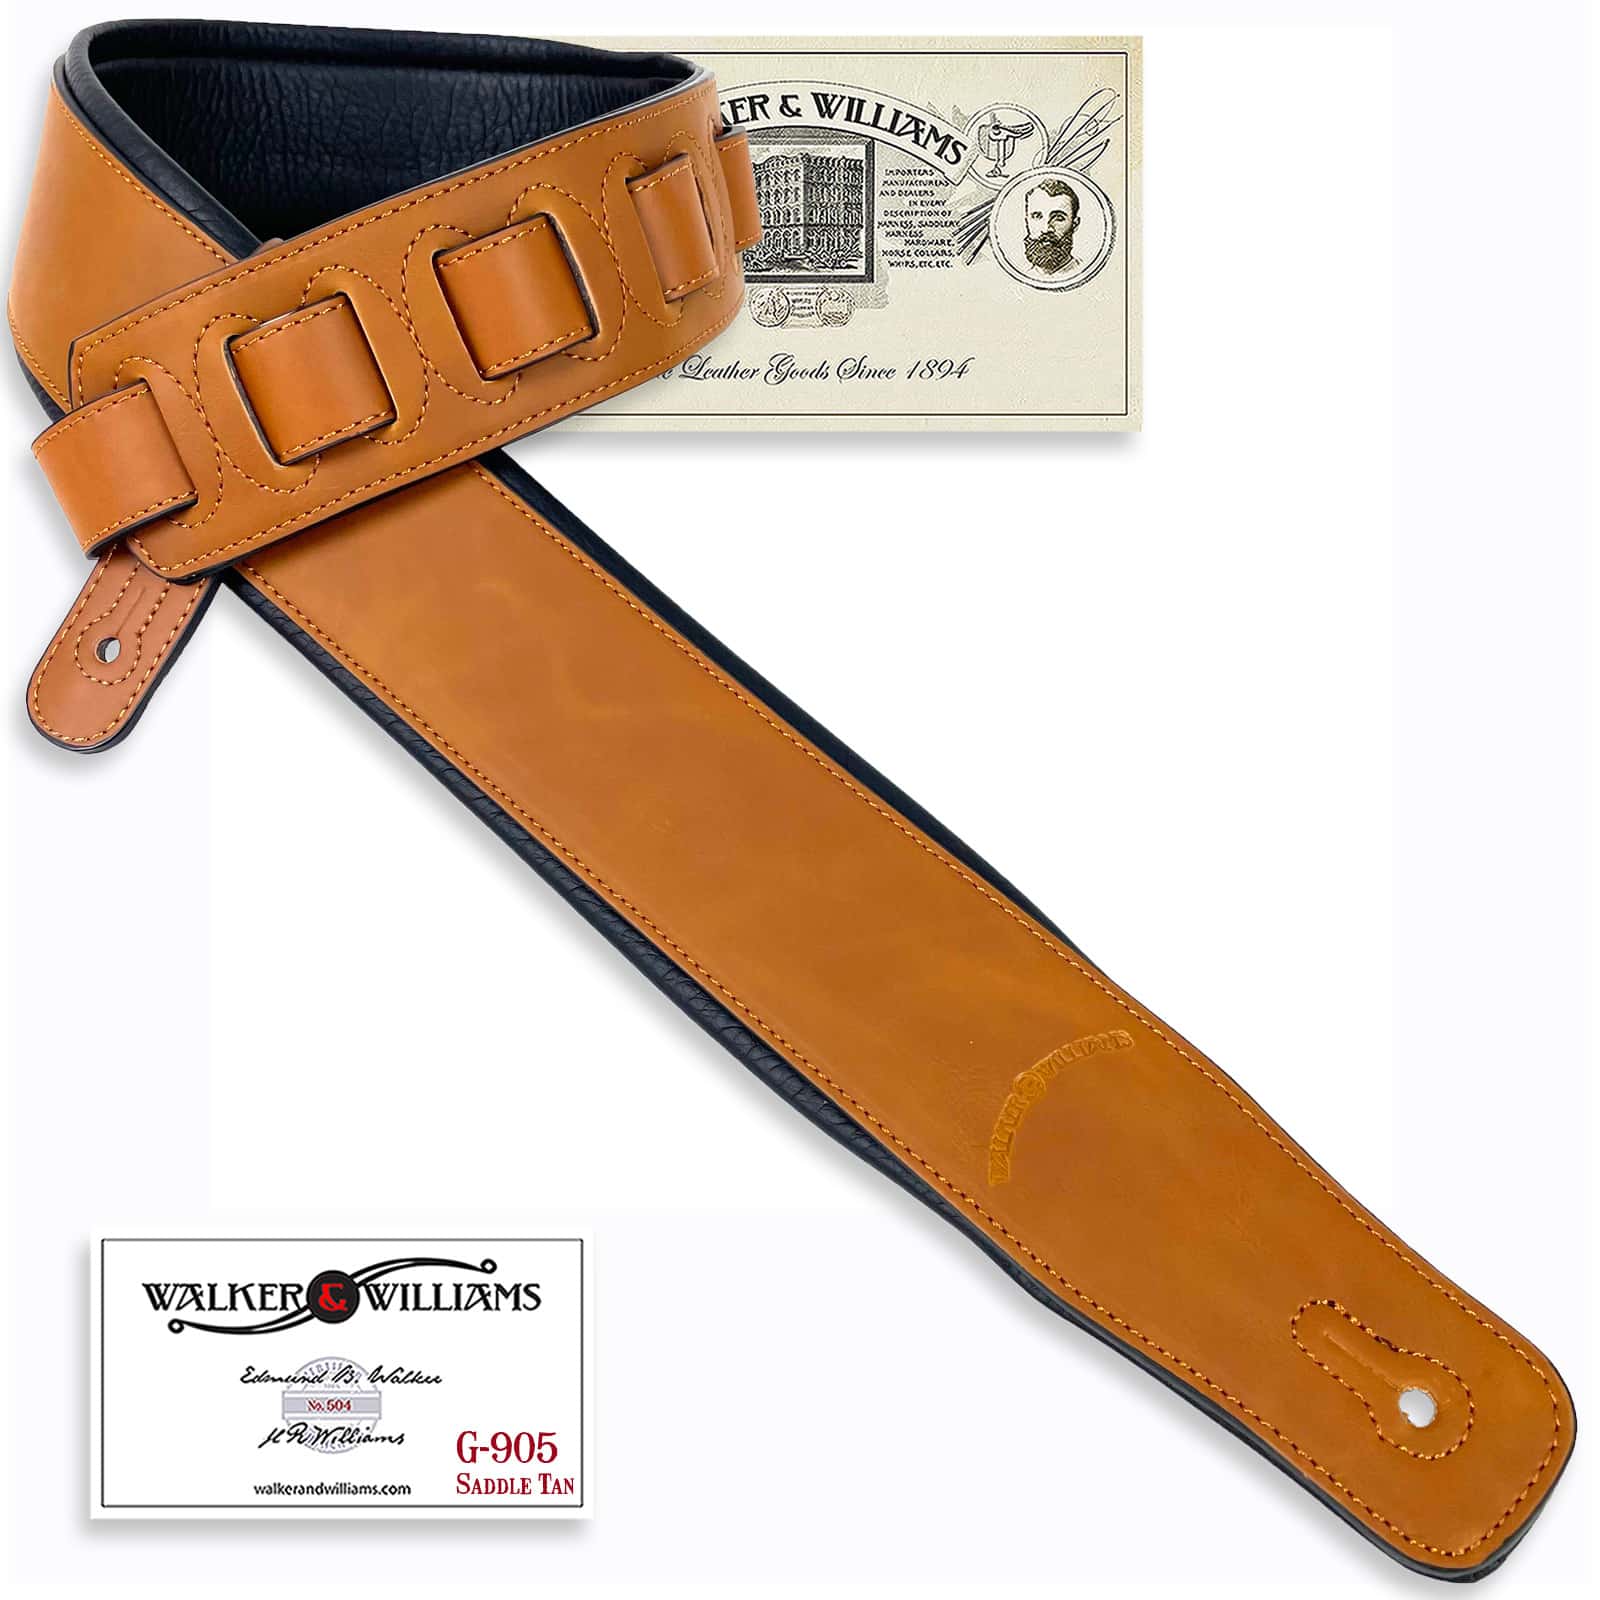 G-905 Natural Oil Finish Saddle Tan Strap with Padded Glove